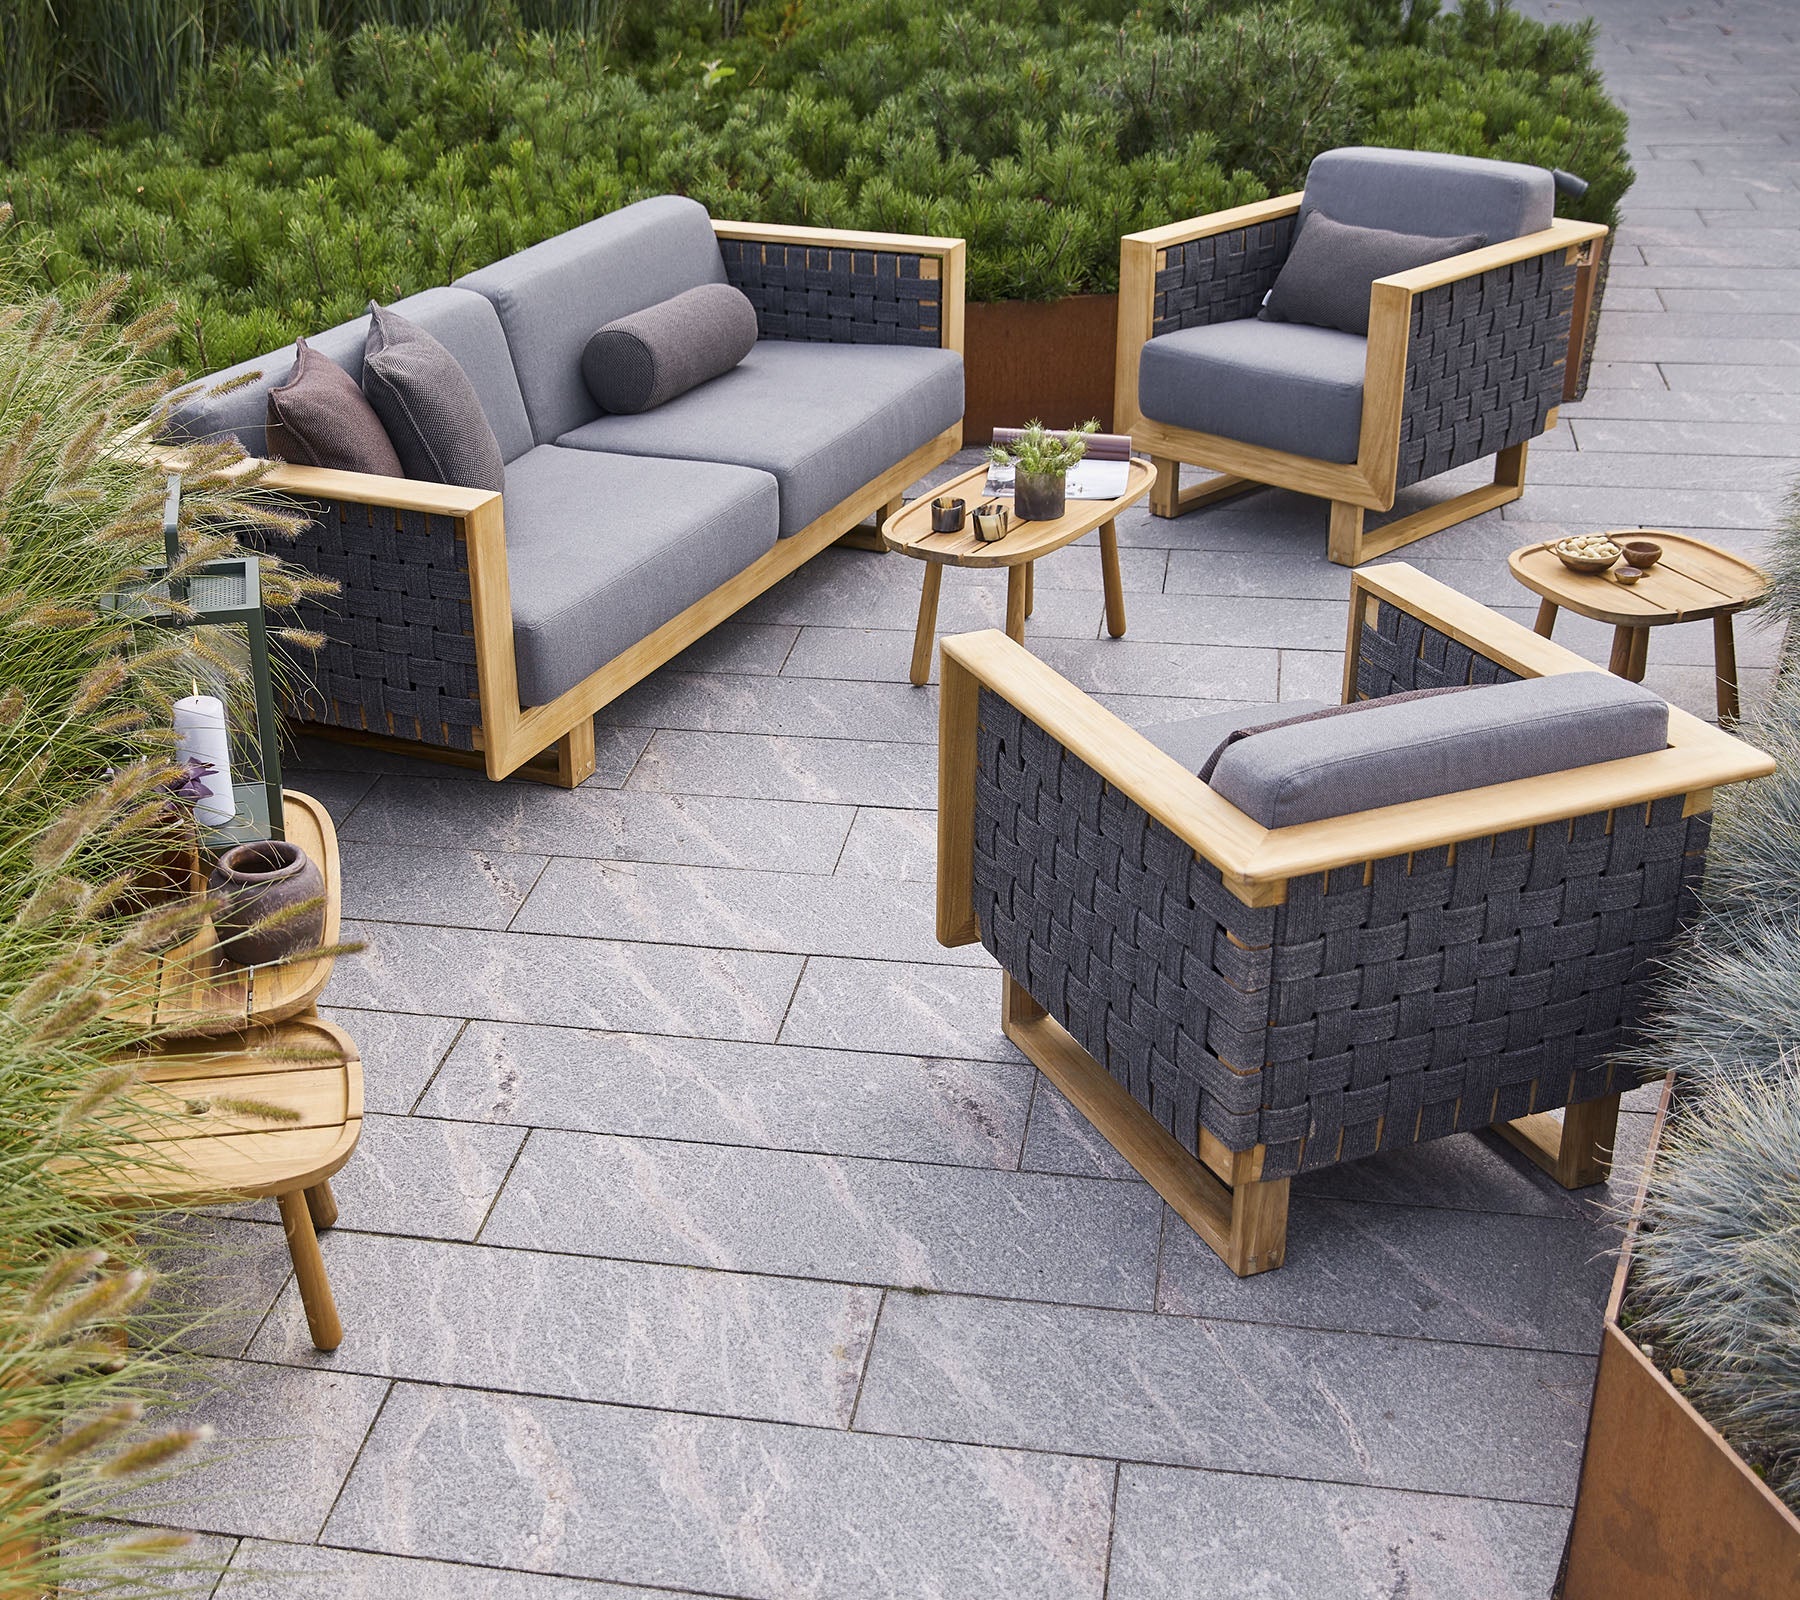 Boxhill's Angle 3-Seater Teak Frame Sofa lifestyle image with Angle Teak Frame Lounge Chair at the garden